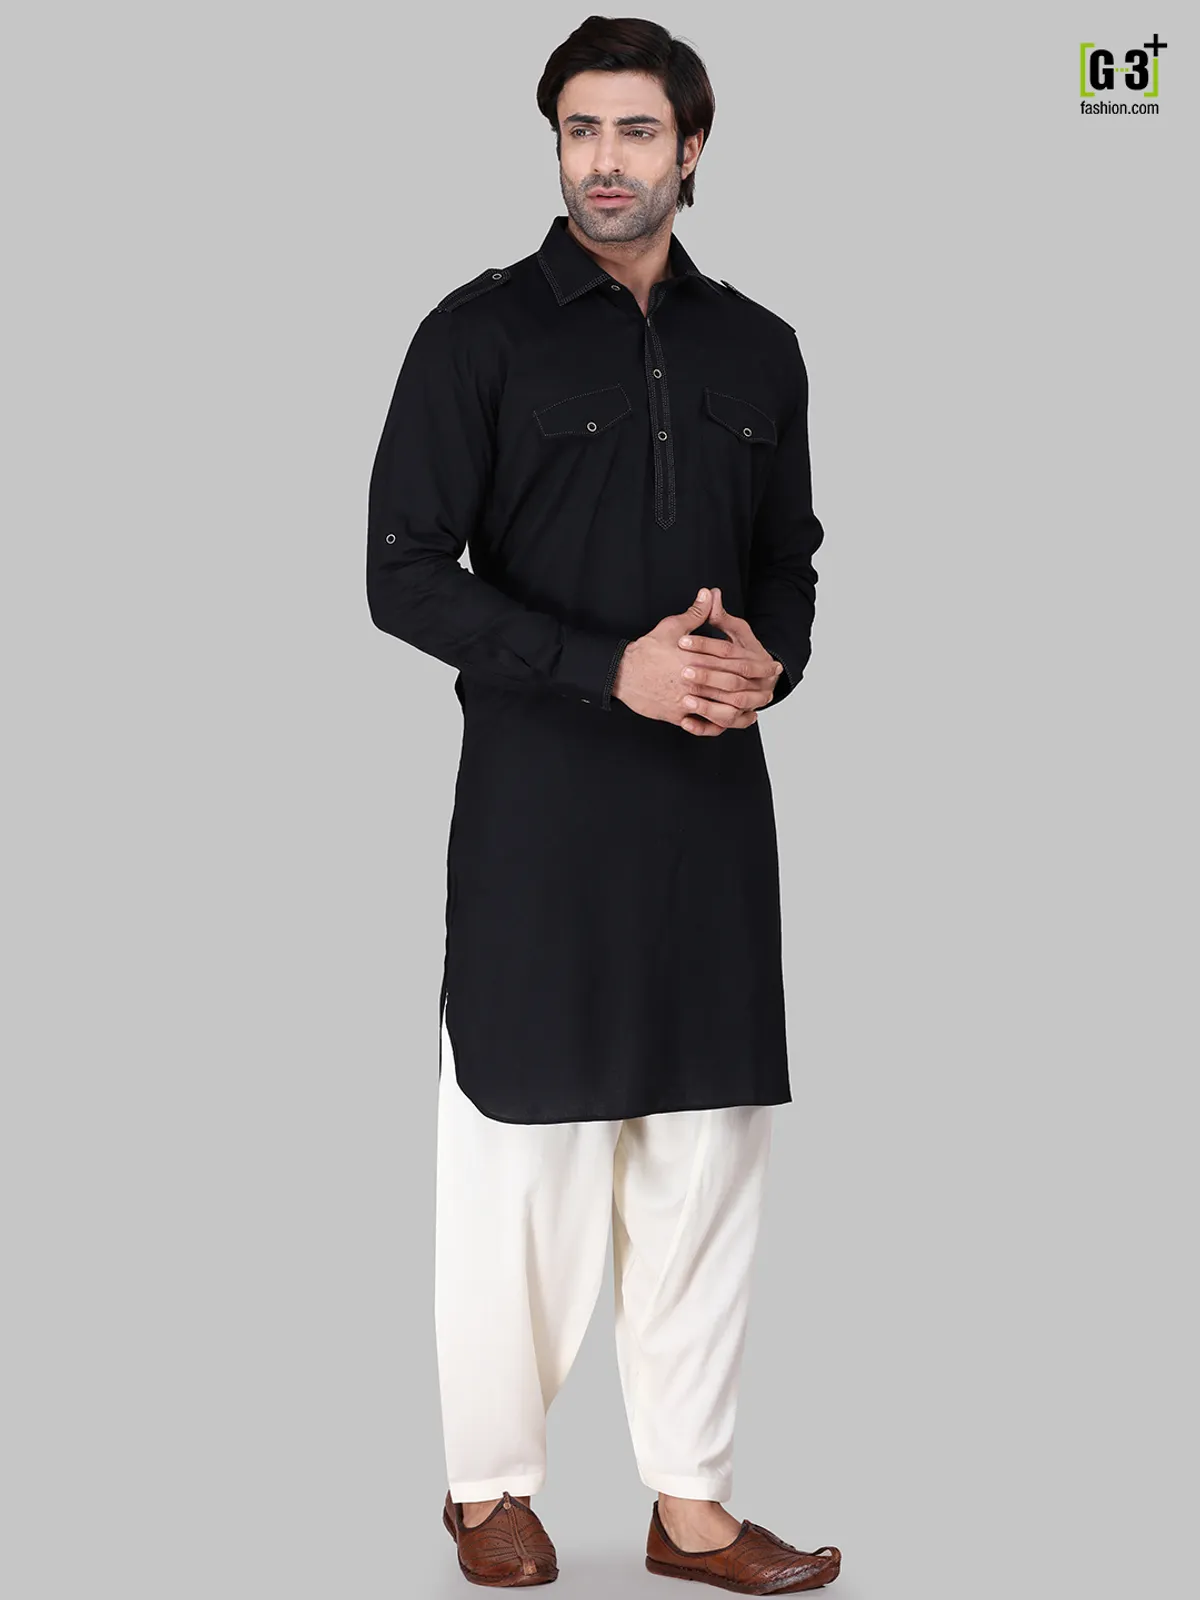 Solid black cotton rayon pathani suit